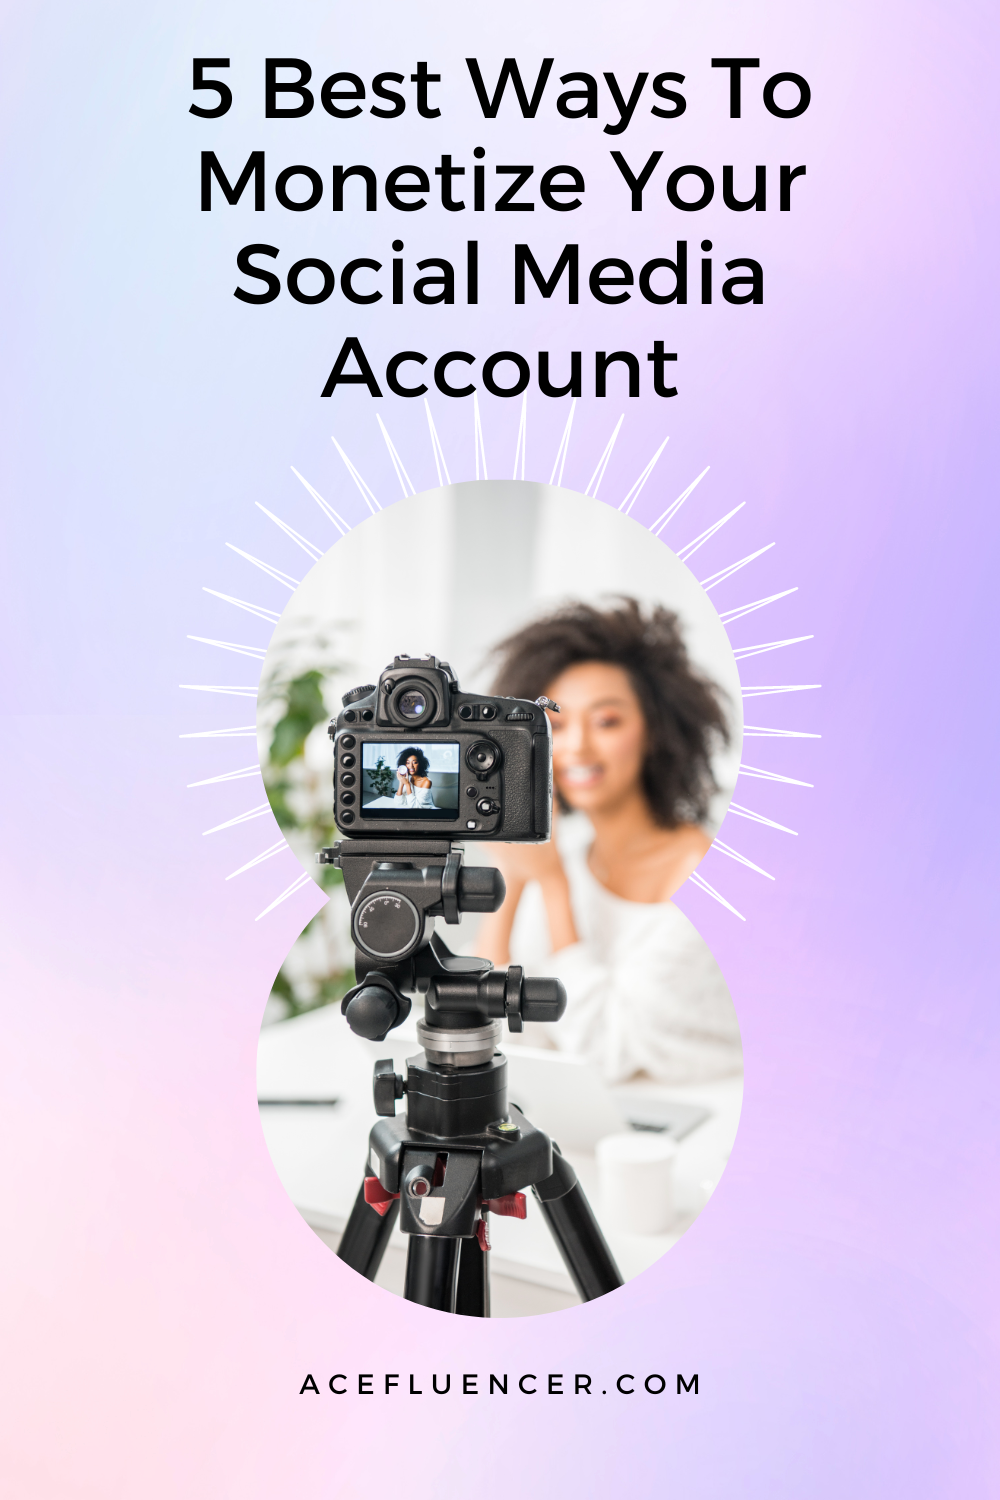 5 Best Ways To Monetize Your Social Media Account